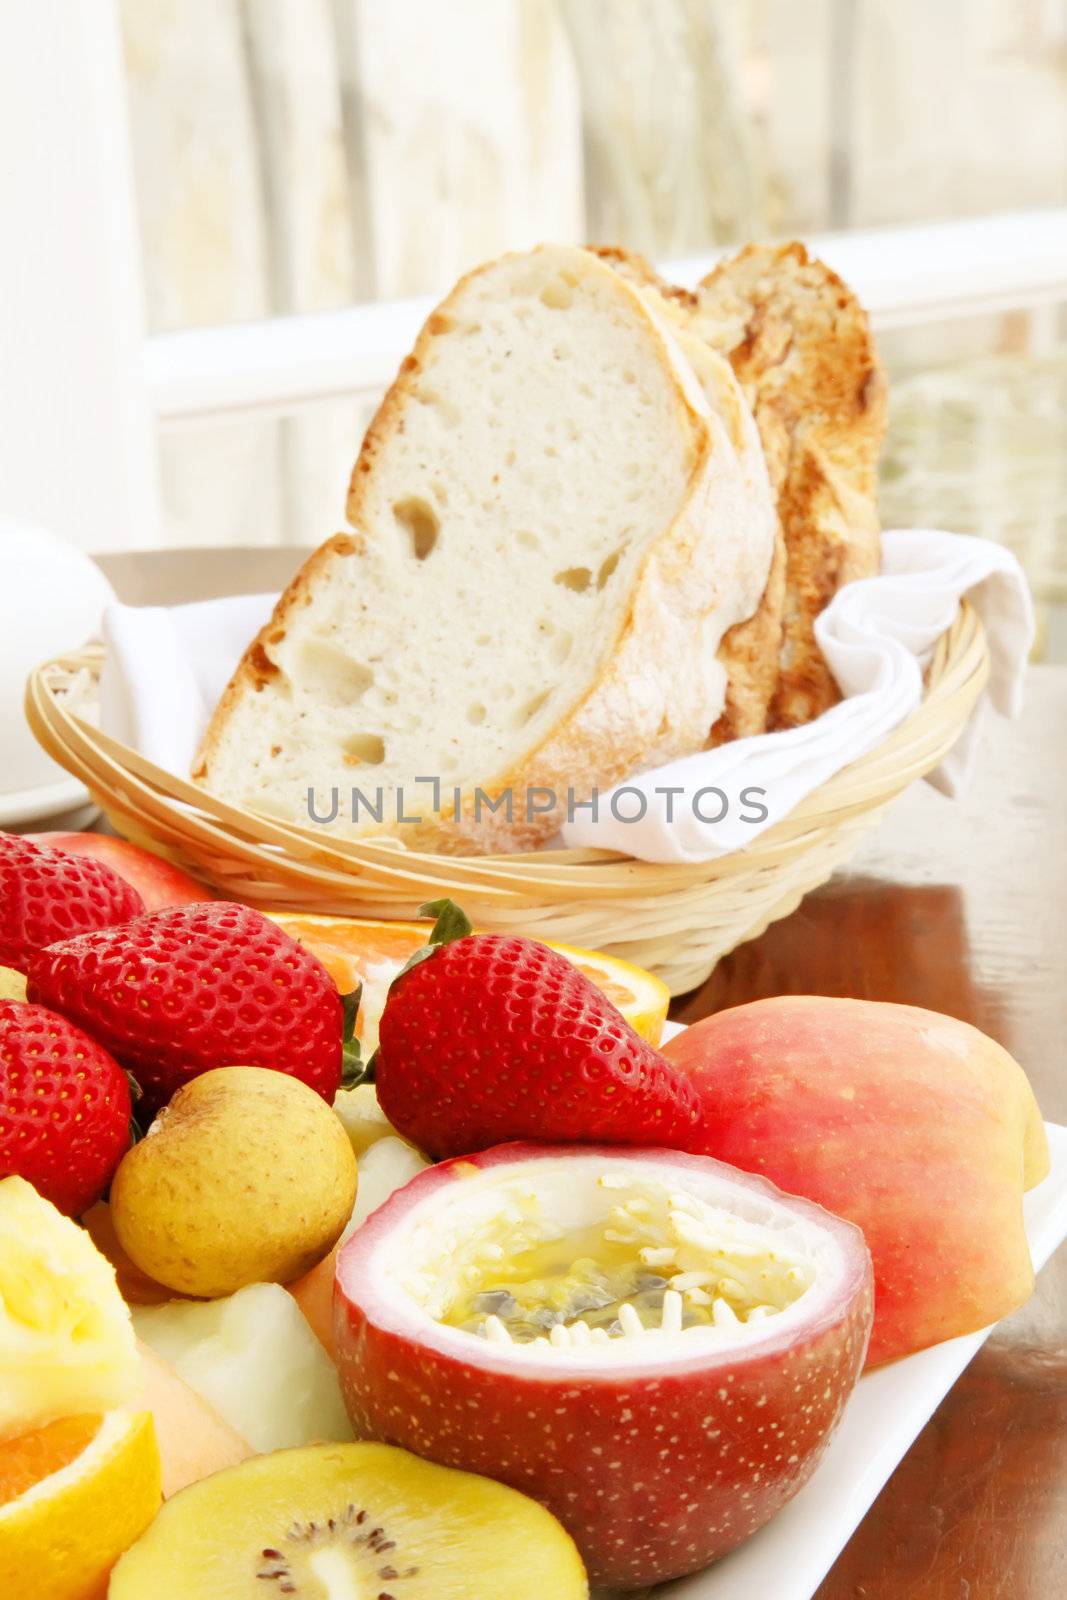 Freshly Baked Bread Cut into Slices with Fruits